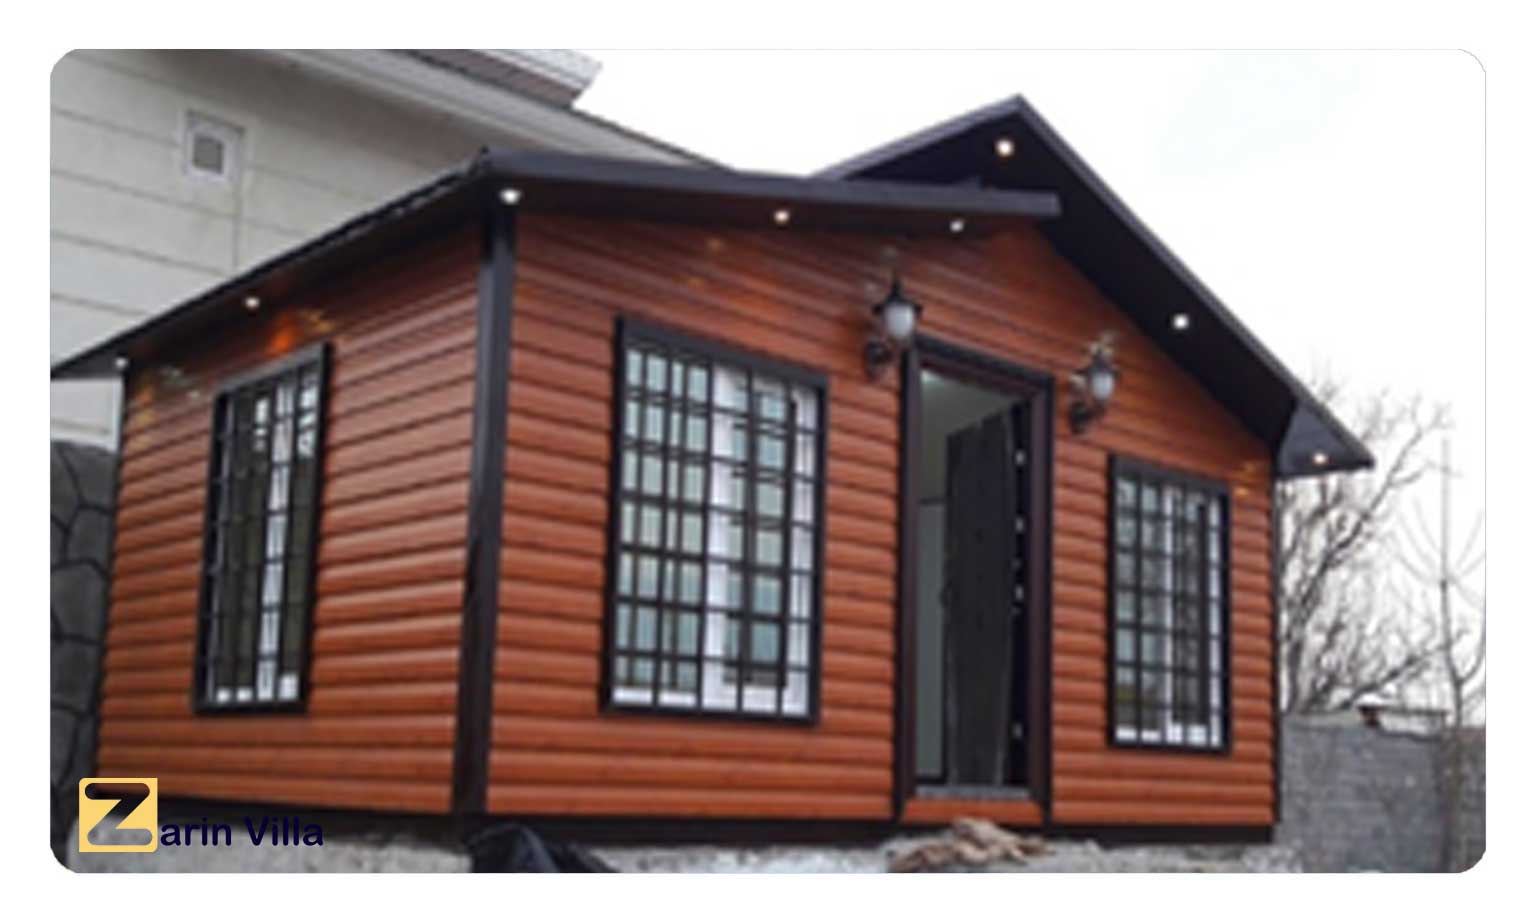 The price of a 40-meter prefabricated house